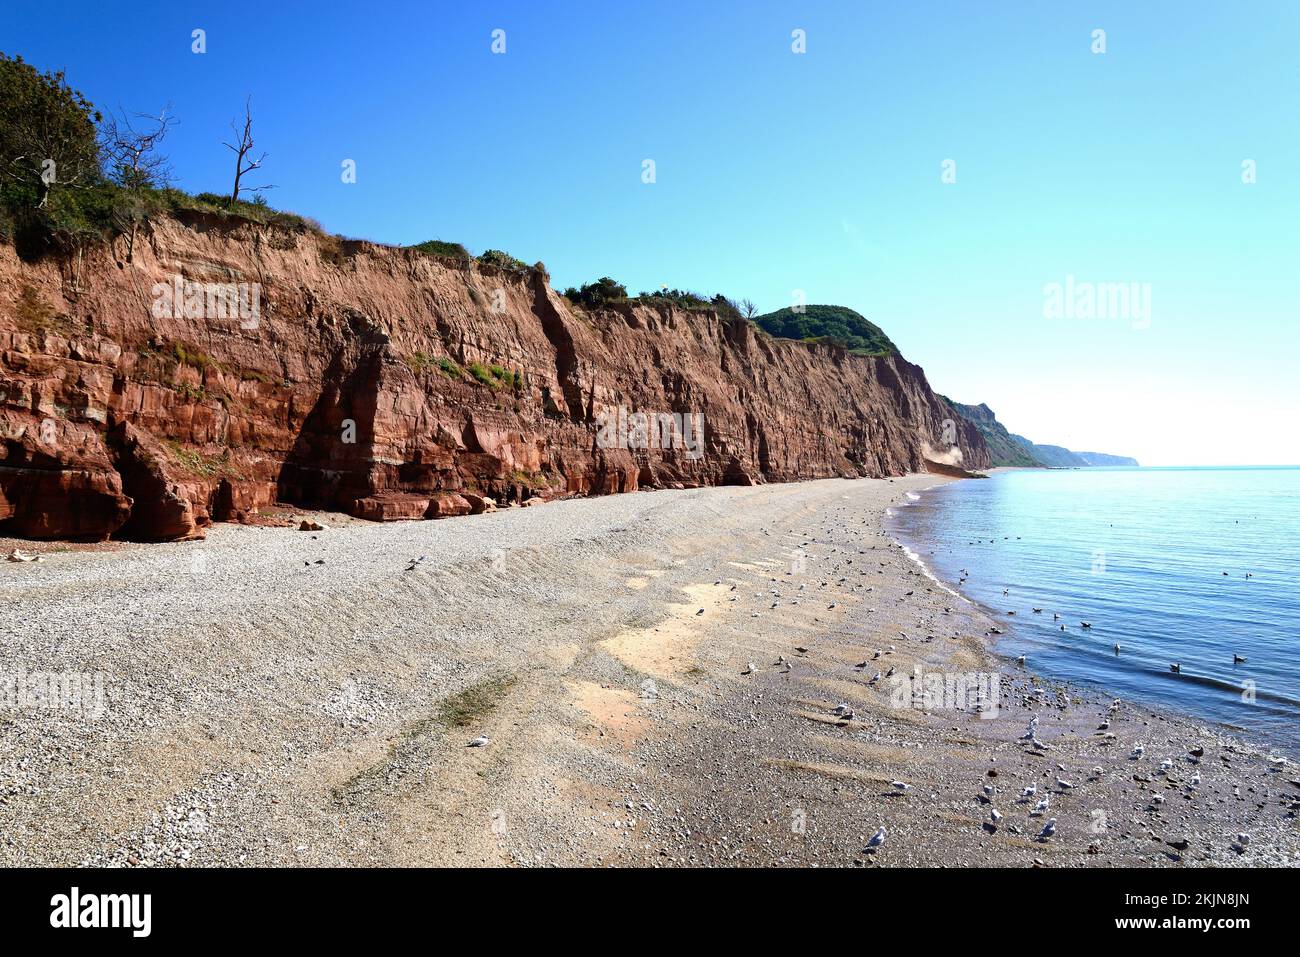 View of the beach and cliffs at Pennington Point, Sidmouth, Devon, UK, Europe, Stock Photo